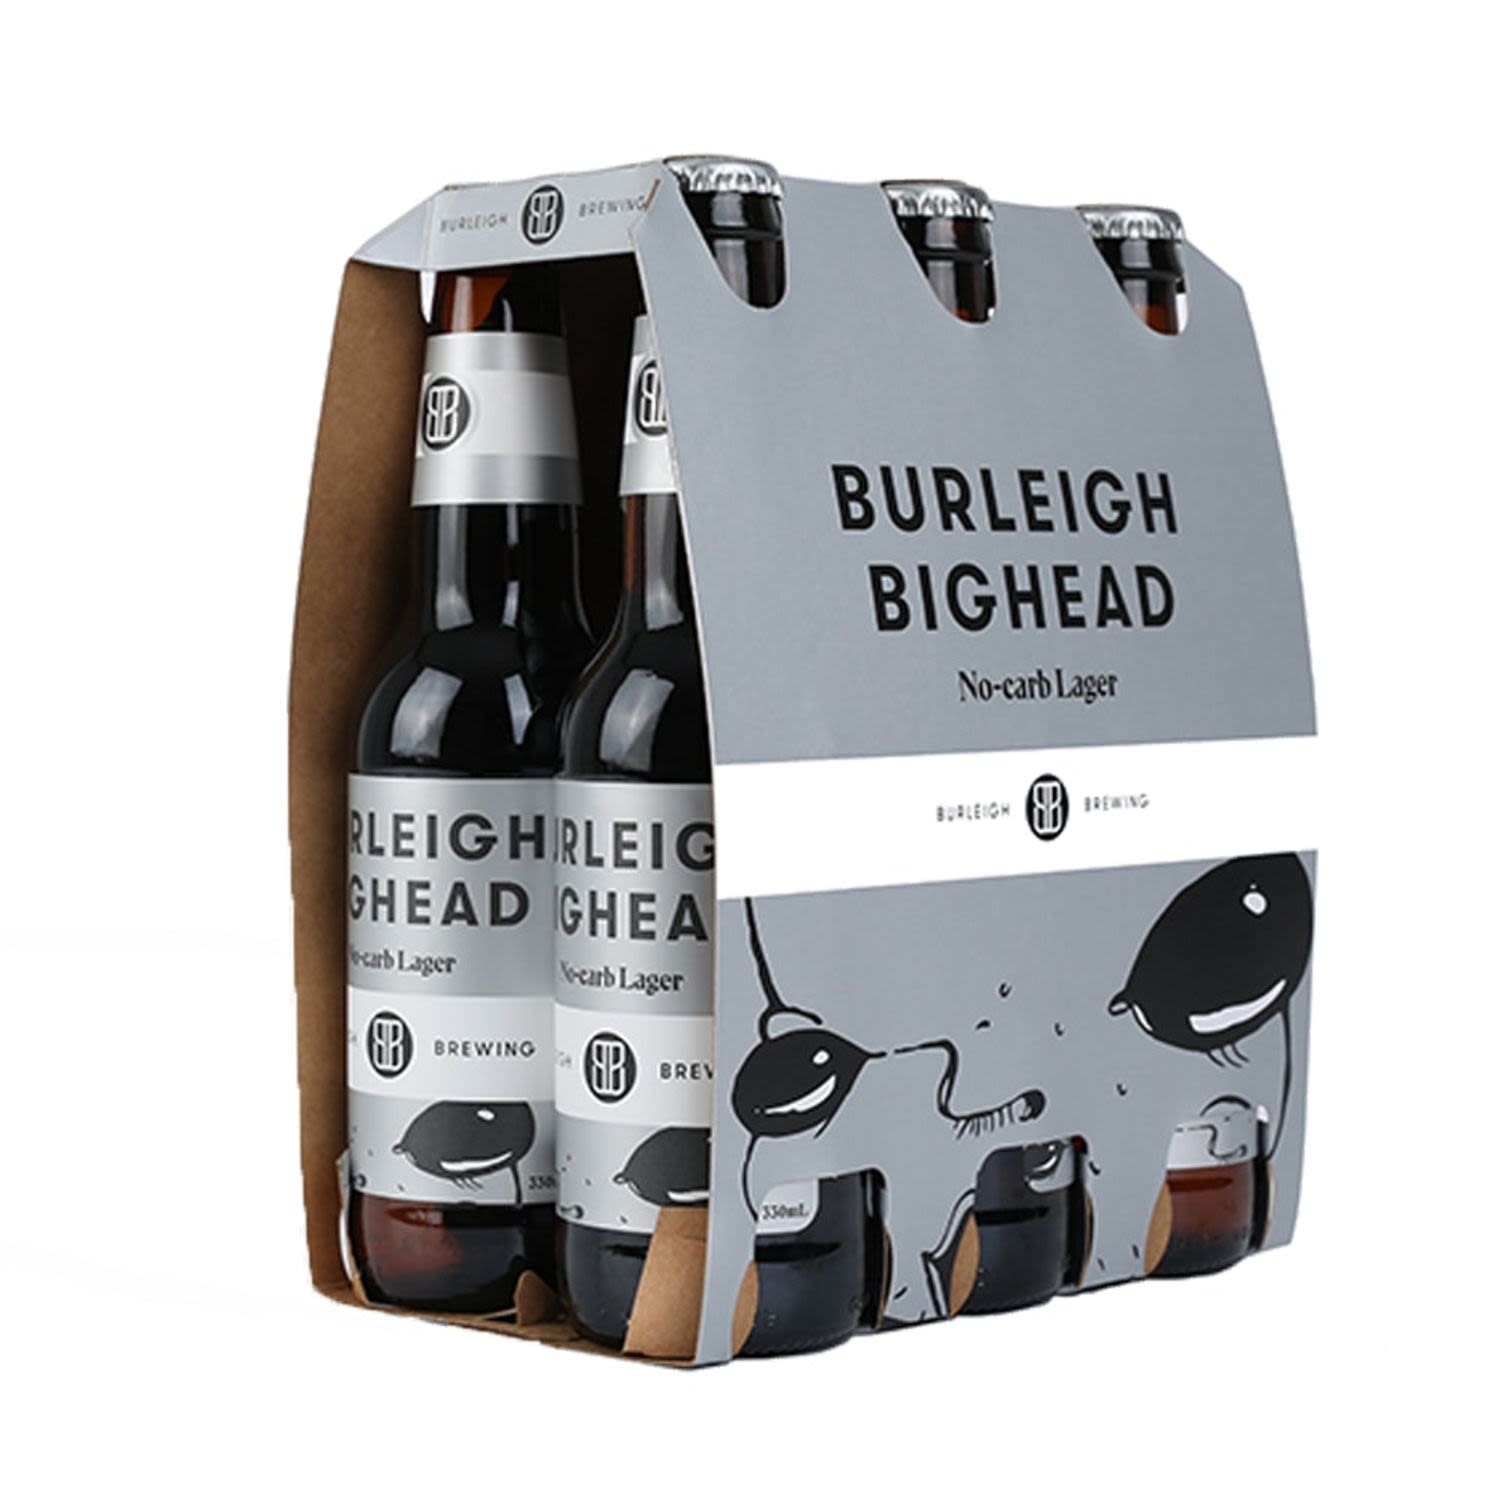 Australia's first no carb beer, Big Head is a refreshing and full-flavoured lager styled beer with plenty of hop bitterness making it a fantastic sessional beer.<br /> <br />Alcohol Volume: 4.20%<br /><br />Pack Format: 6 Pack<br /><br />Standard Drinks: 1.1</br /><br />Pack Type: Bottle<br /><br />Country of Origin: Australia<br />